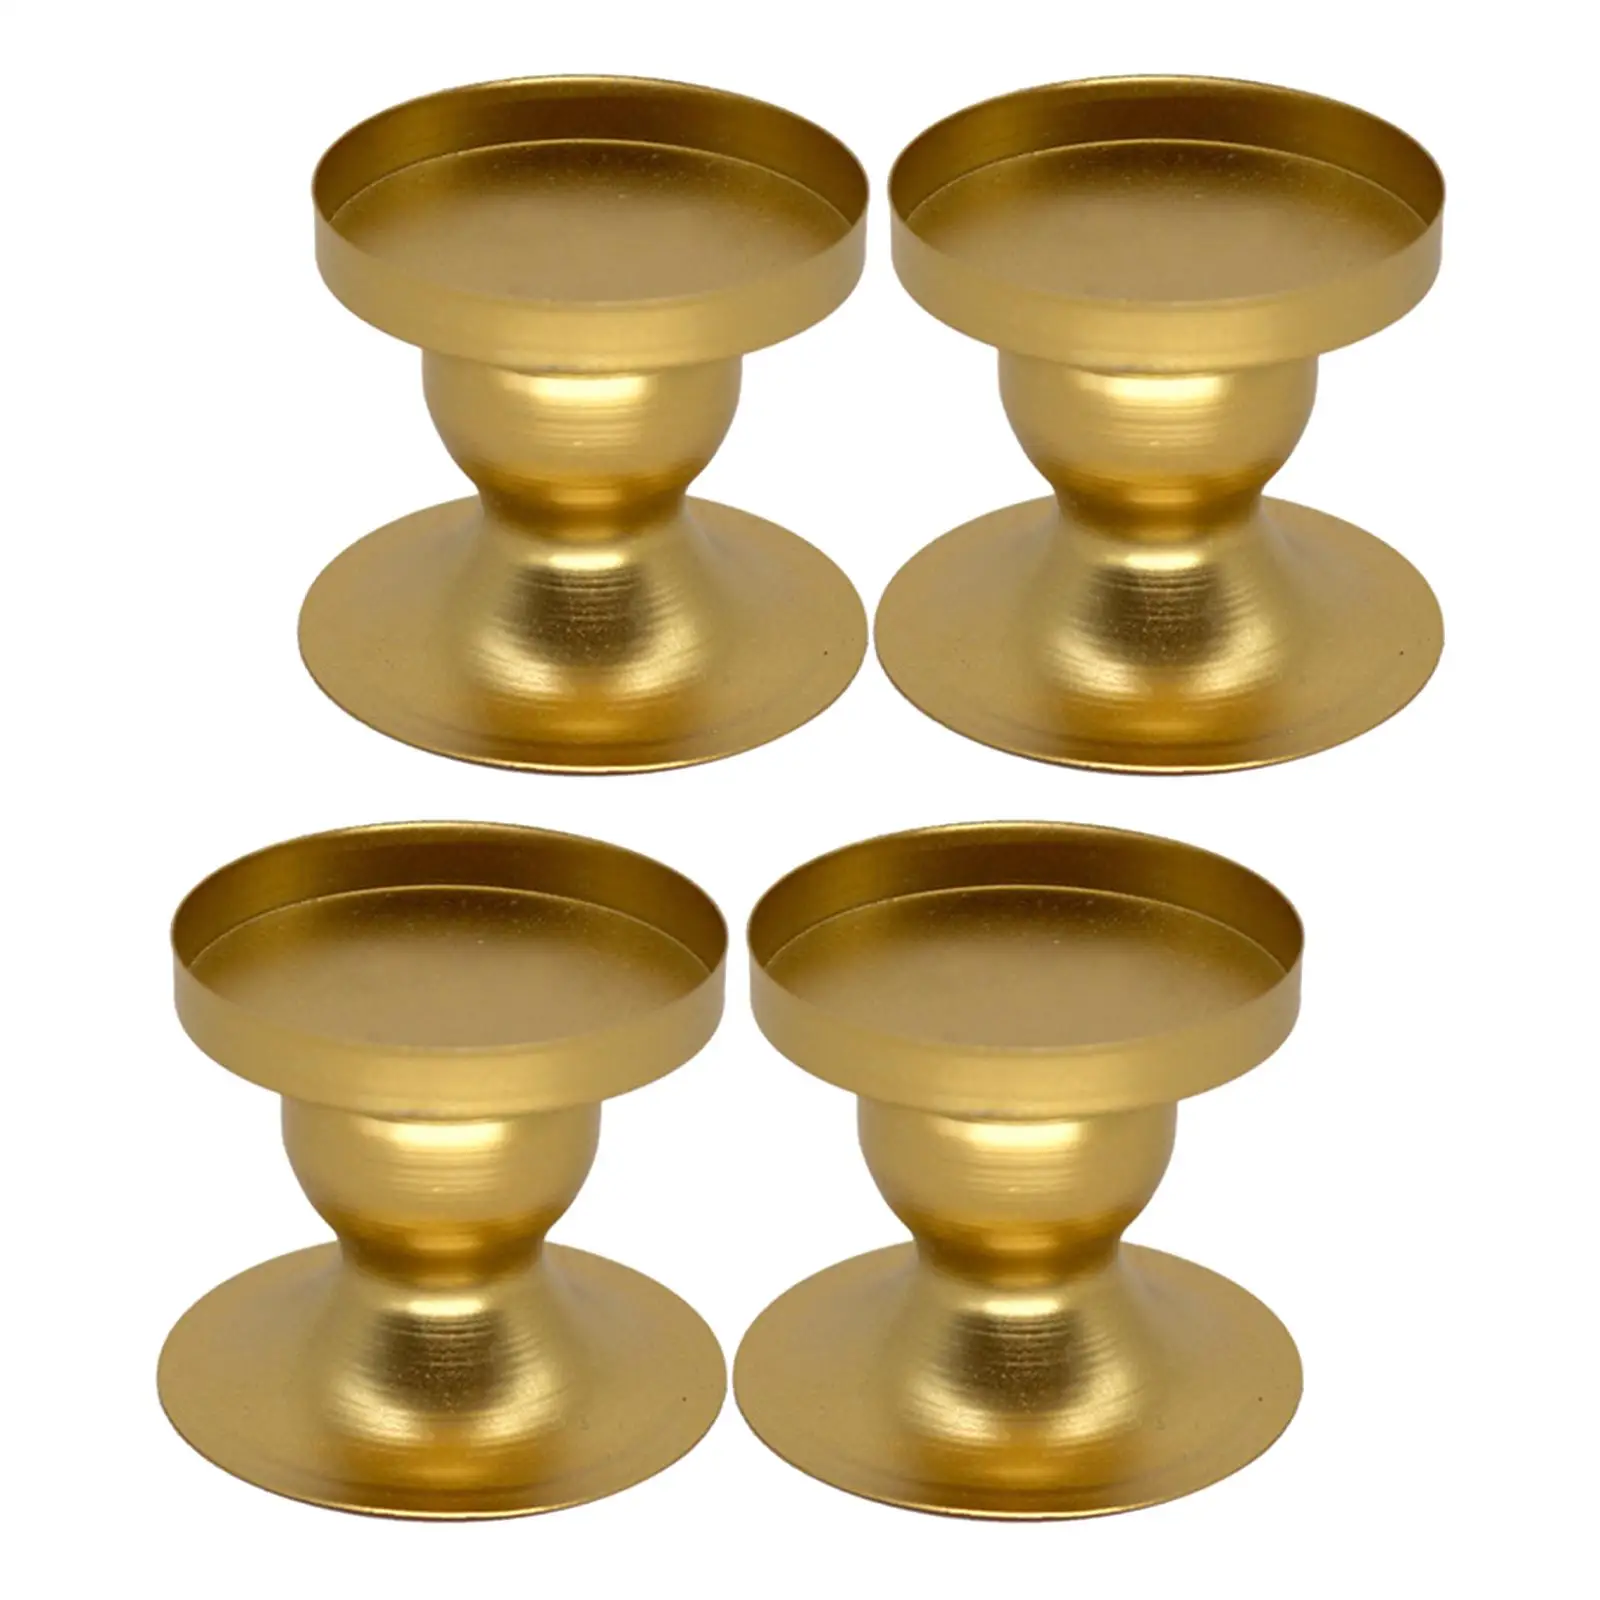 4 Pieces Candle Holder Pillar Candle Tray 2.4inch Tall for Housewarming Gift